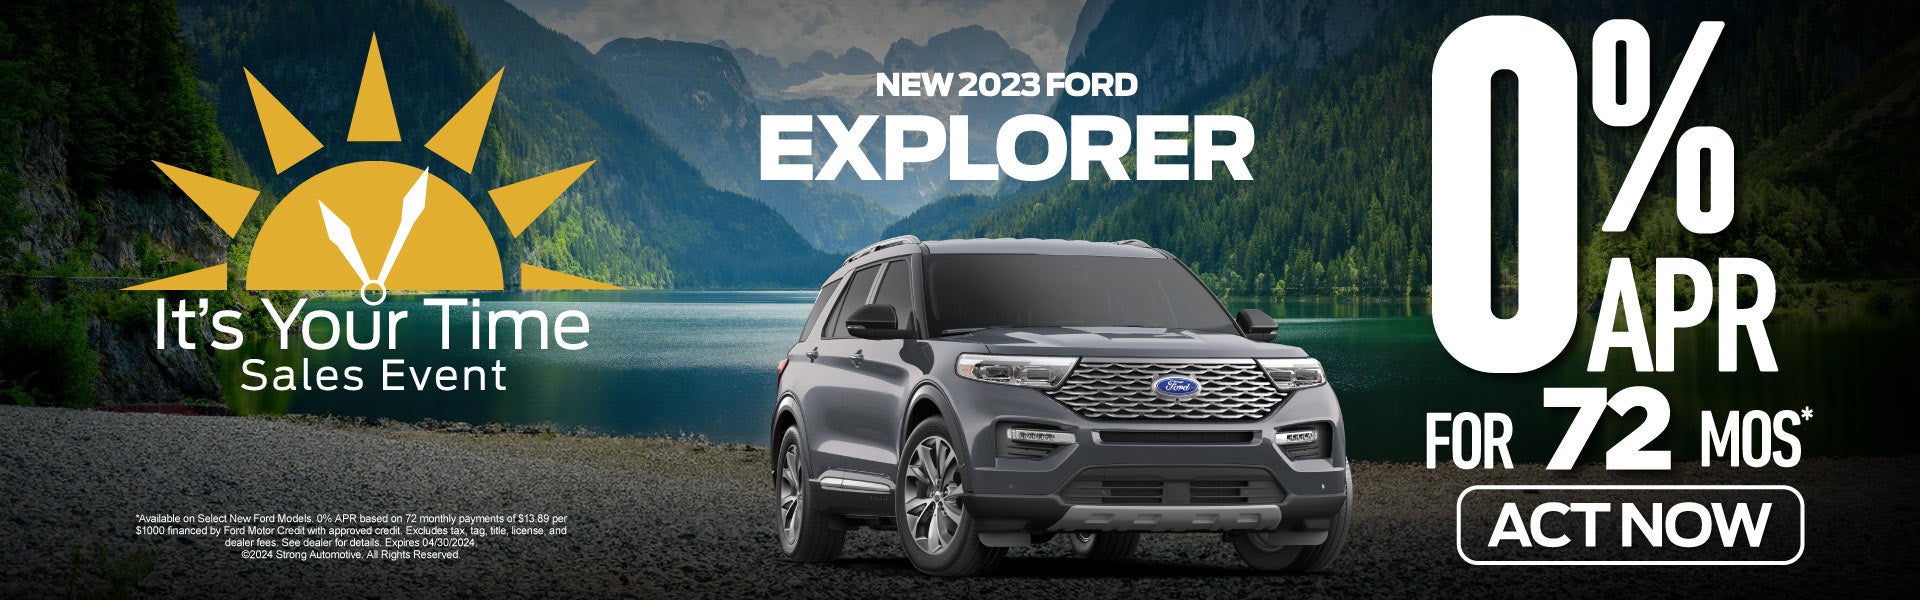 2023 Ford explorer 0% apr for 72 mos. - act now